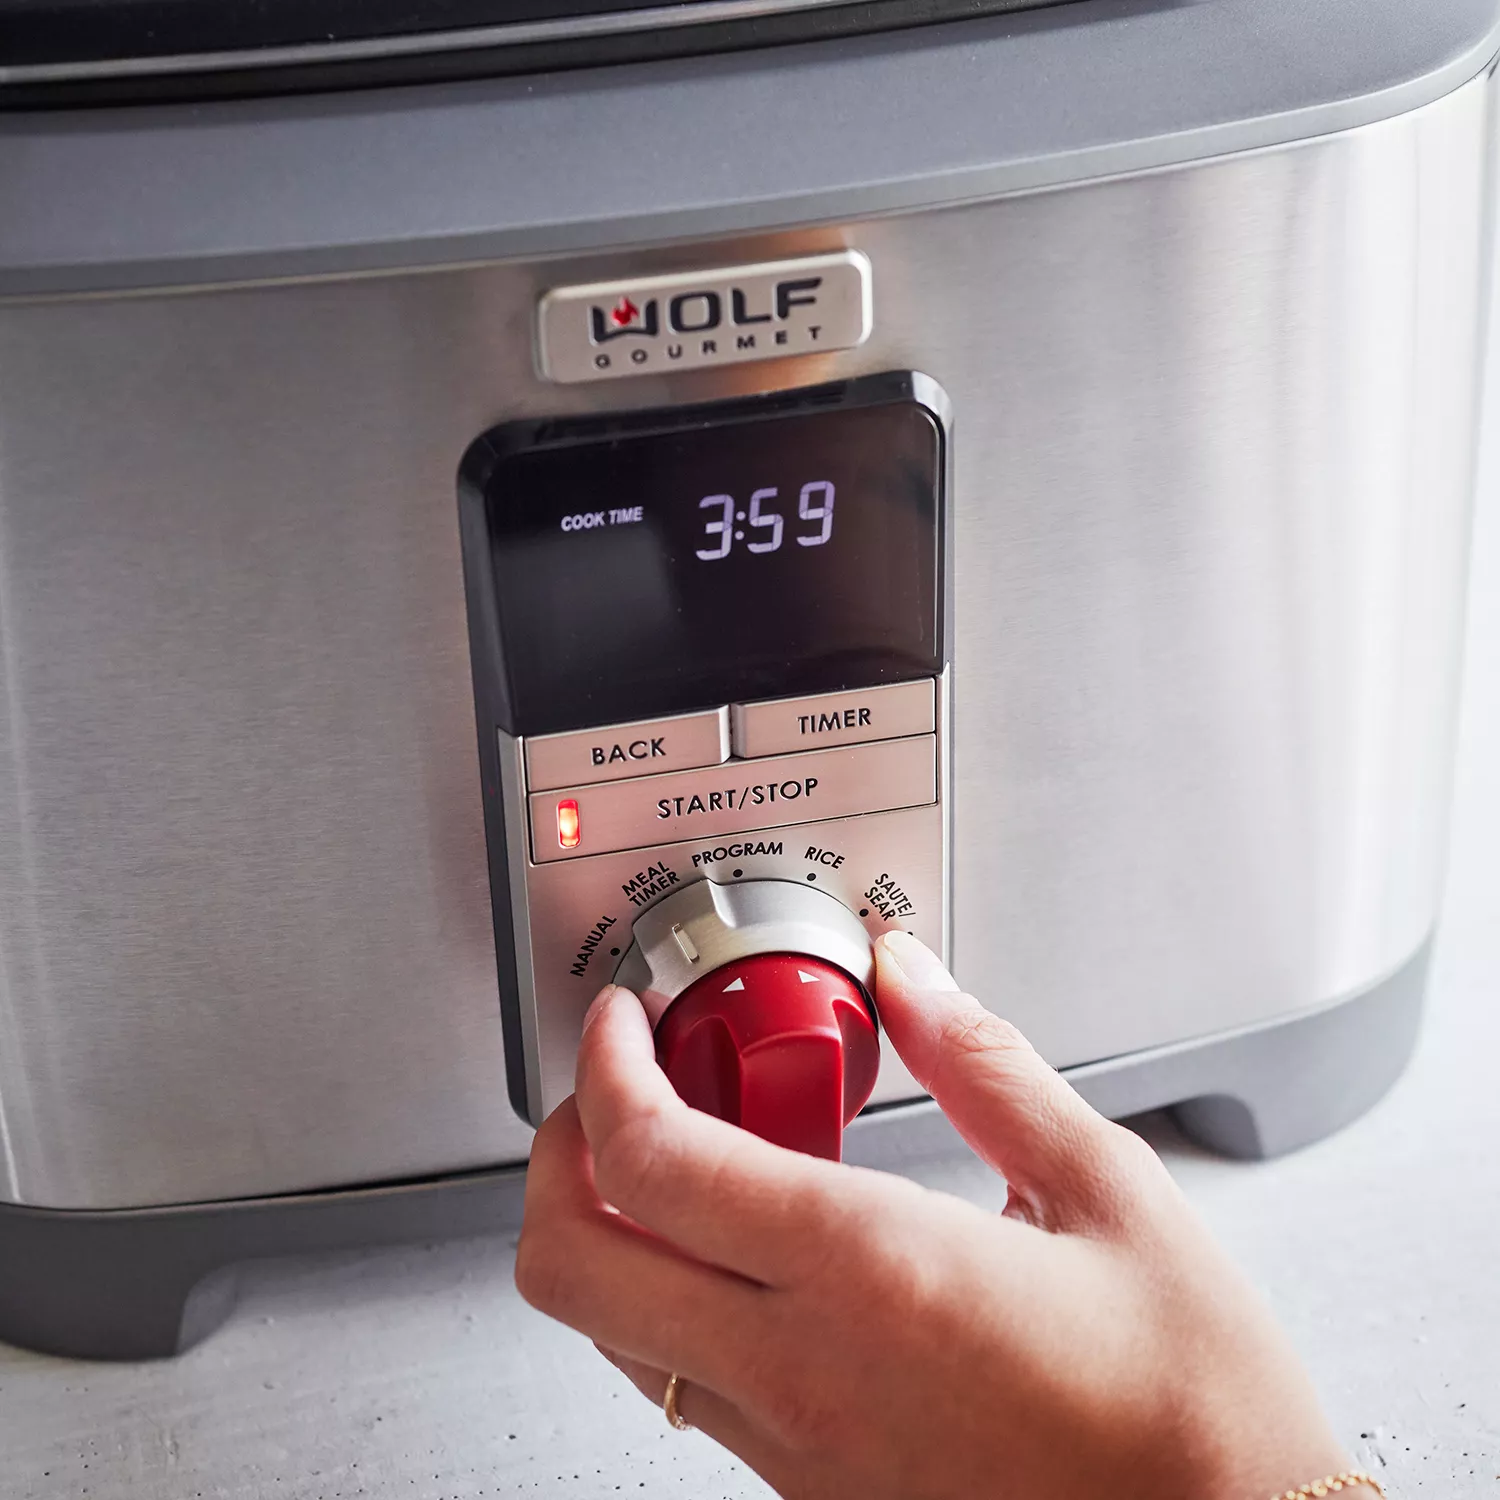 Wolf Gourmet Multi-Function Cooker Review & Giveaway (+ Keto BBQ